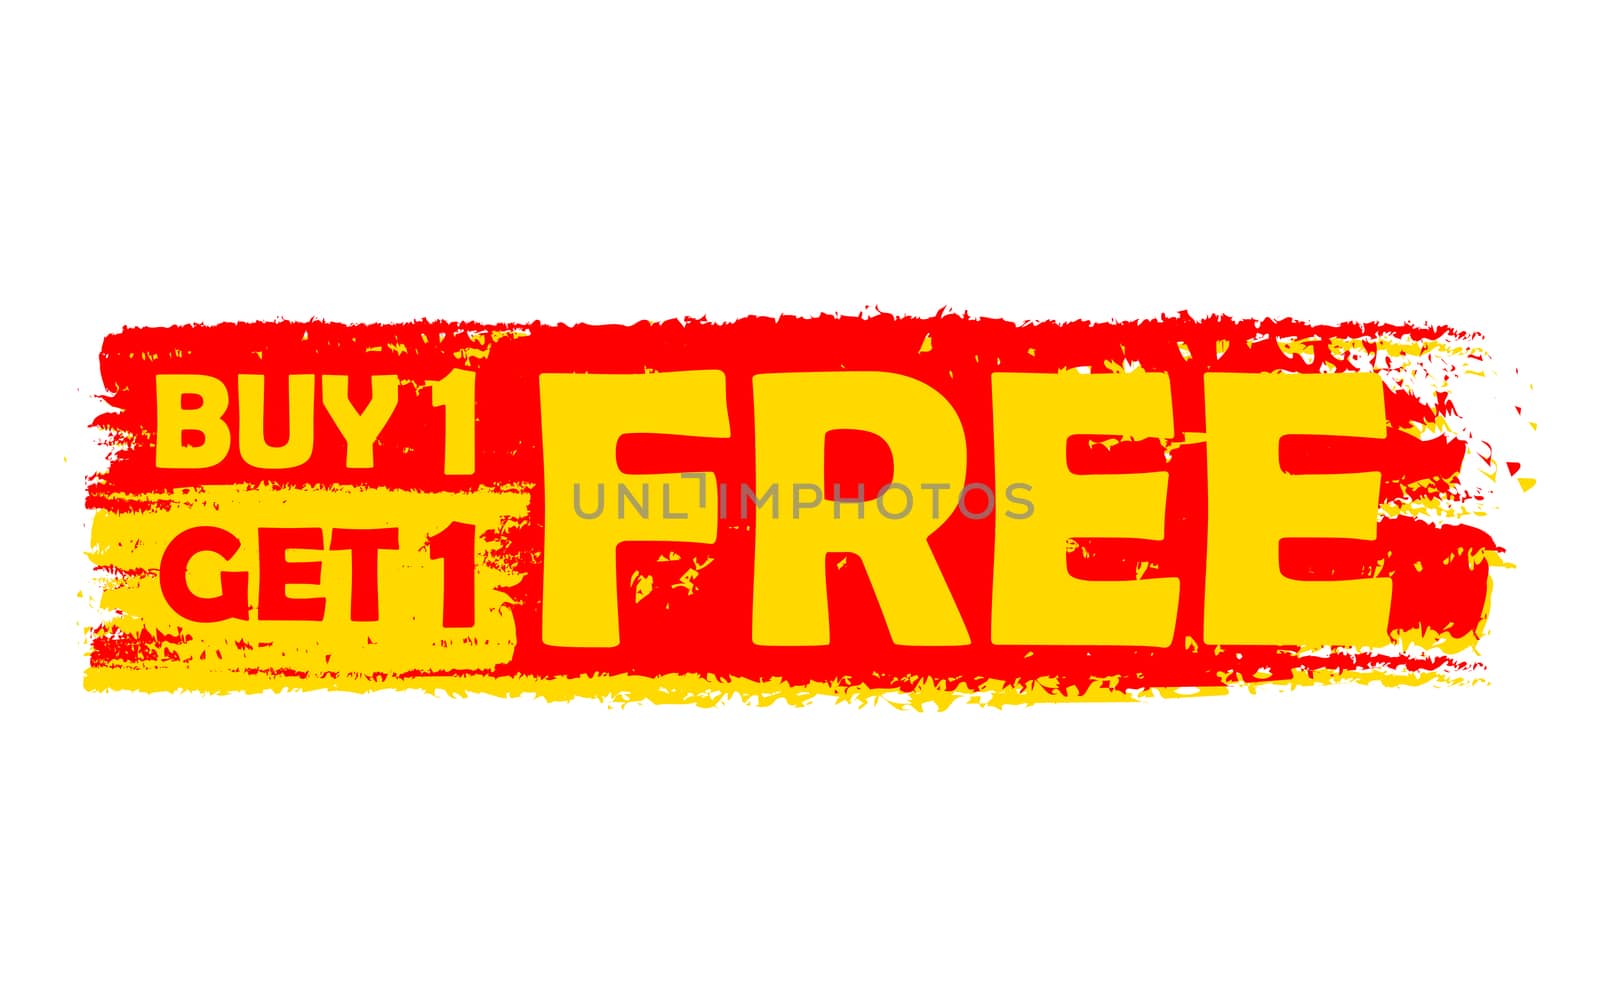 buy one get one free - text in yellow and red drawn label, flat design, business shopping concept